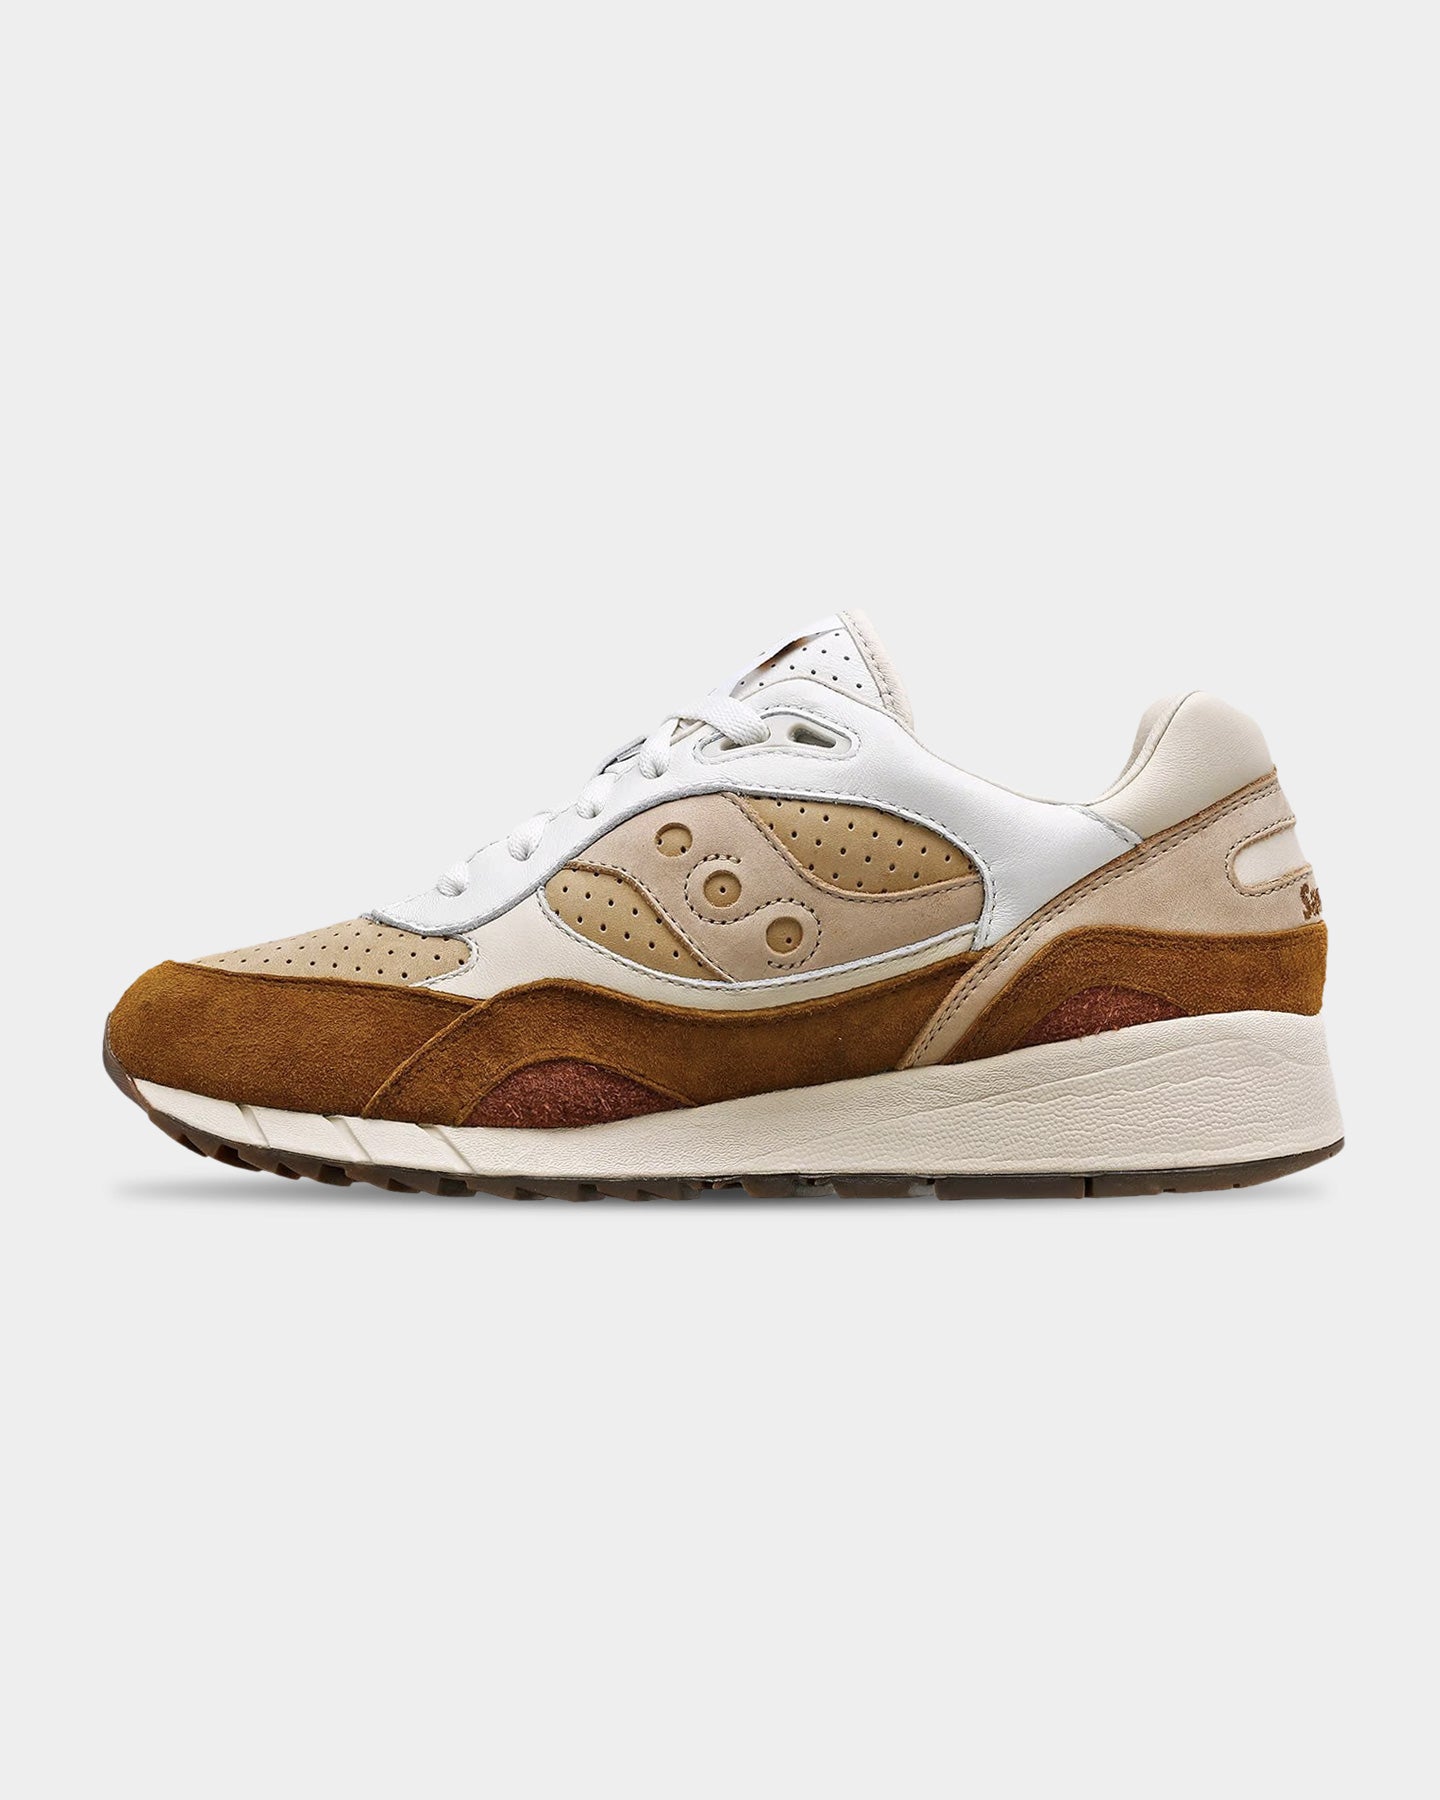 SHADOW 6000 - brown/white